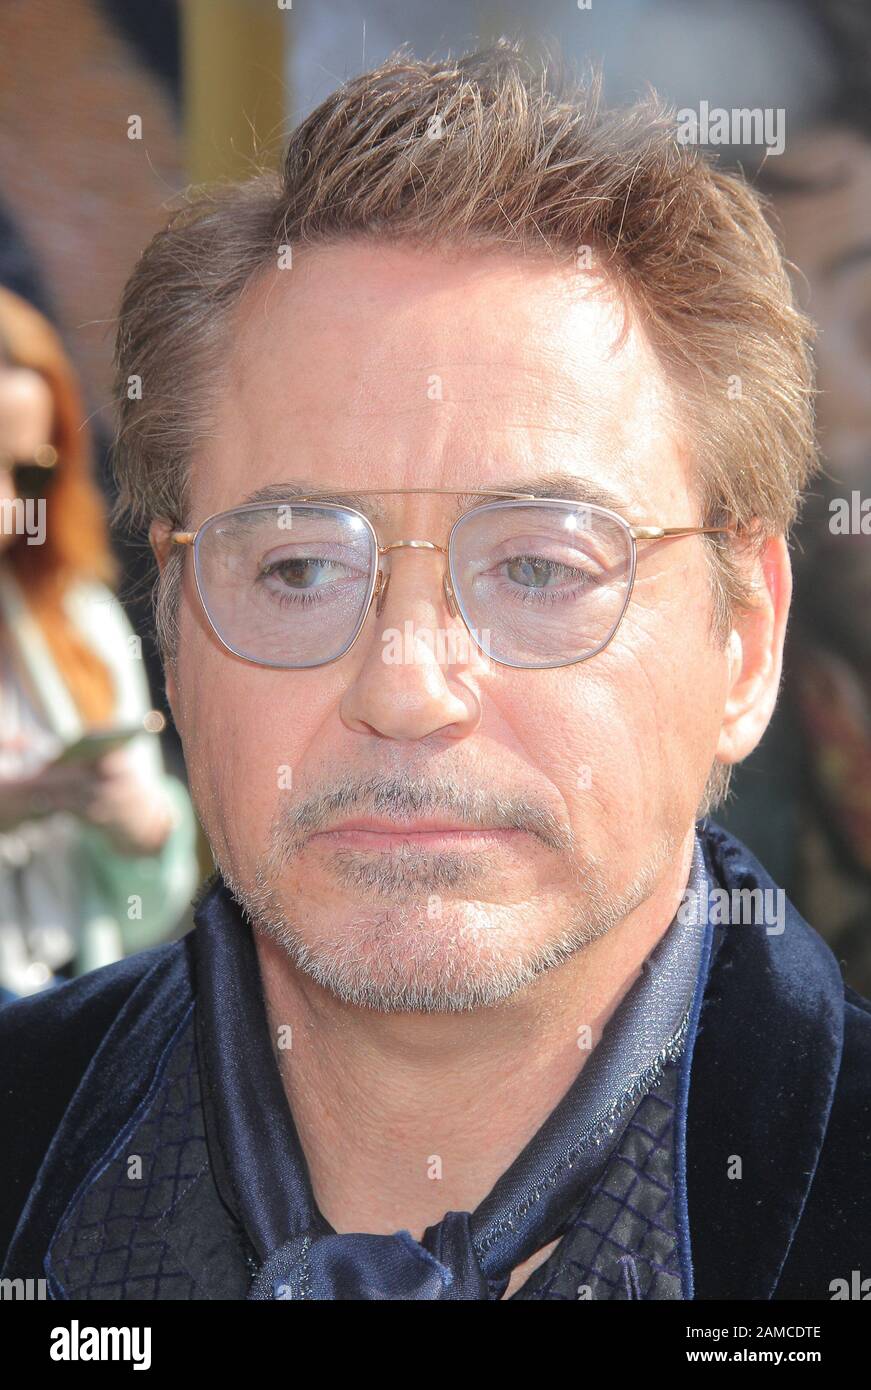 los-angeles-usa-11th-jan-2020-robert-downey-jr-01112020-the-premiere-of-dolittle-held-at-the-regency-village-theatre-in-los-angeles-ca-credit-cronosalamy-live-news-2AMCDTE.jpg